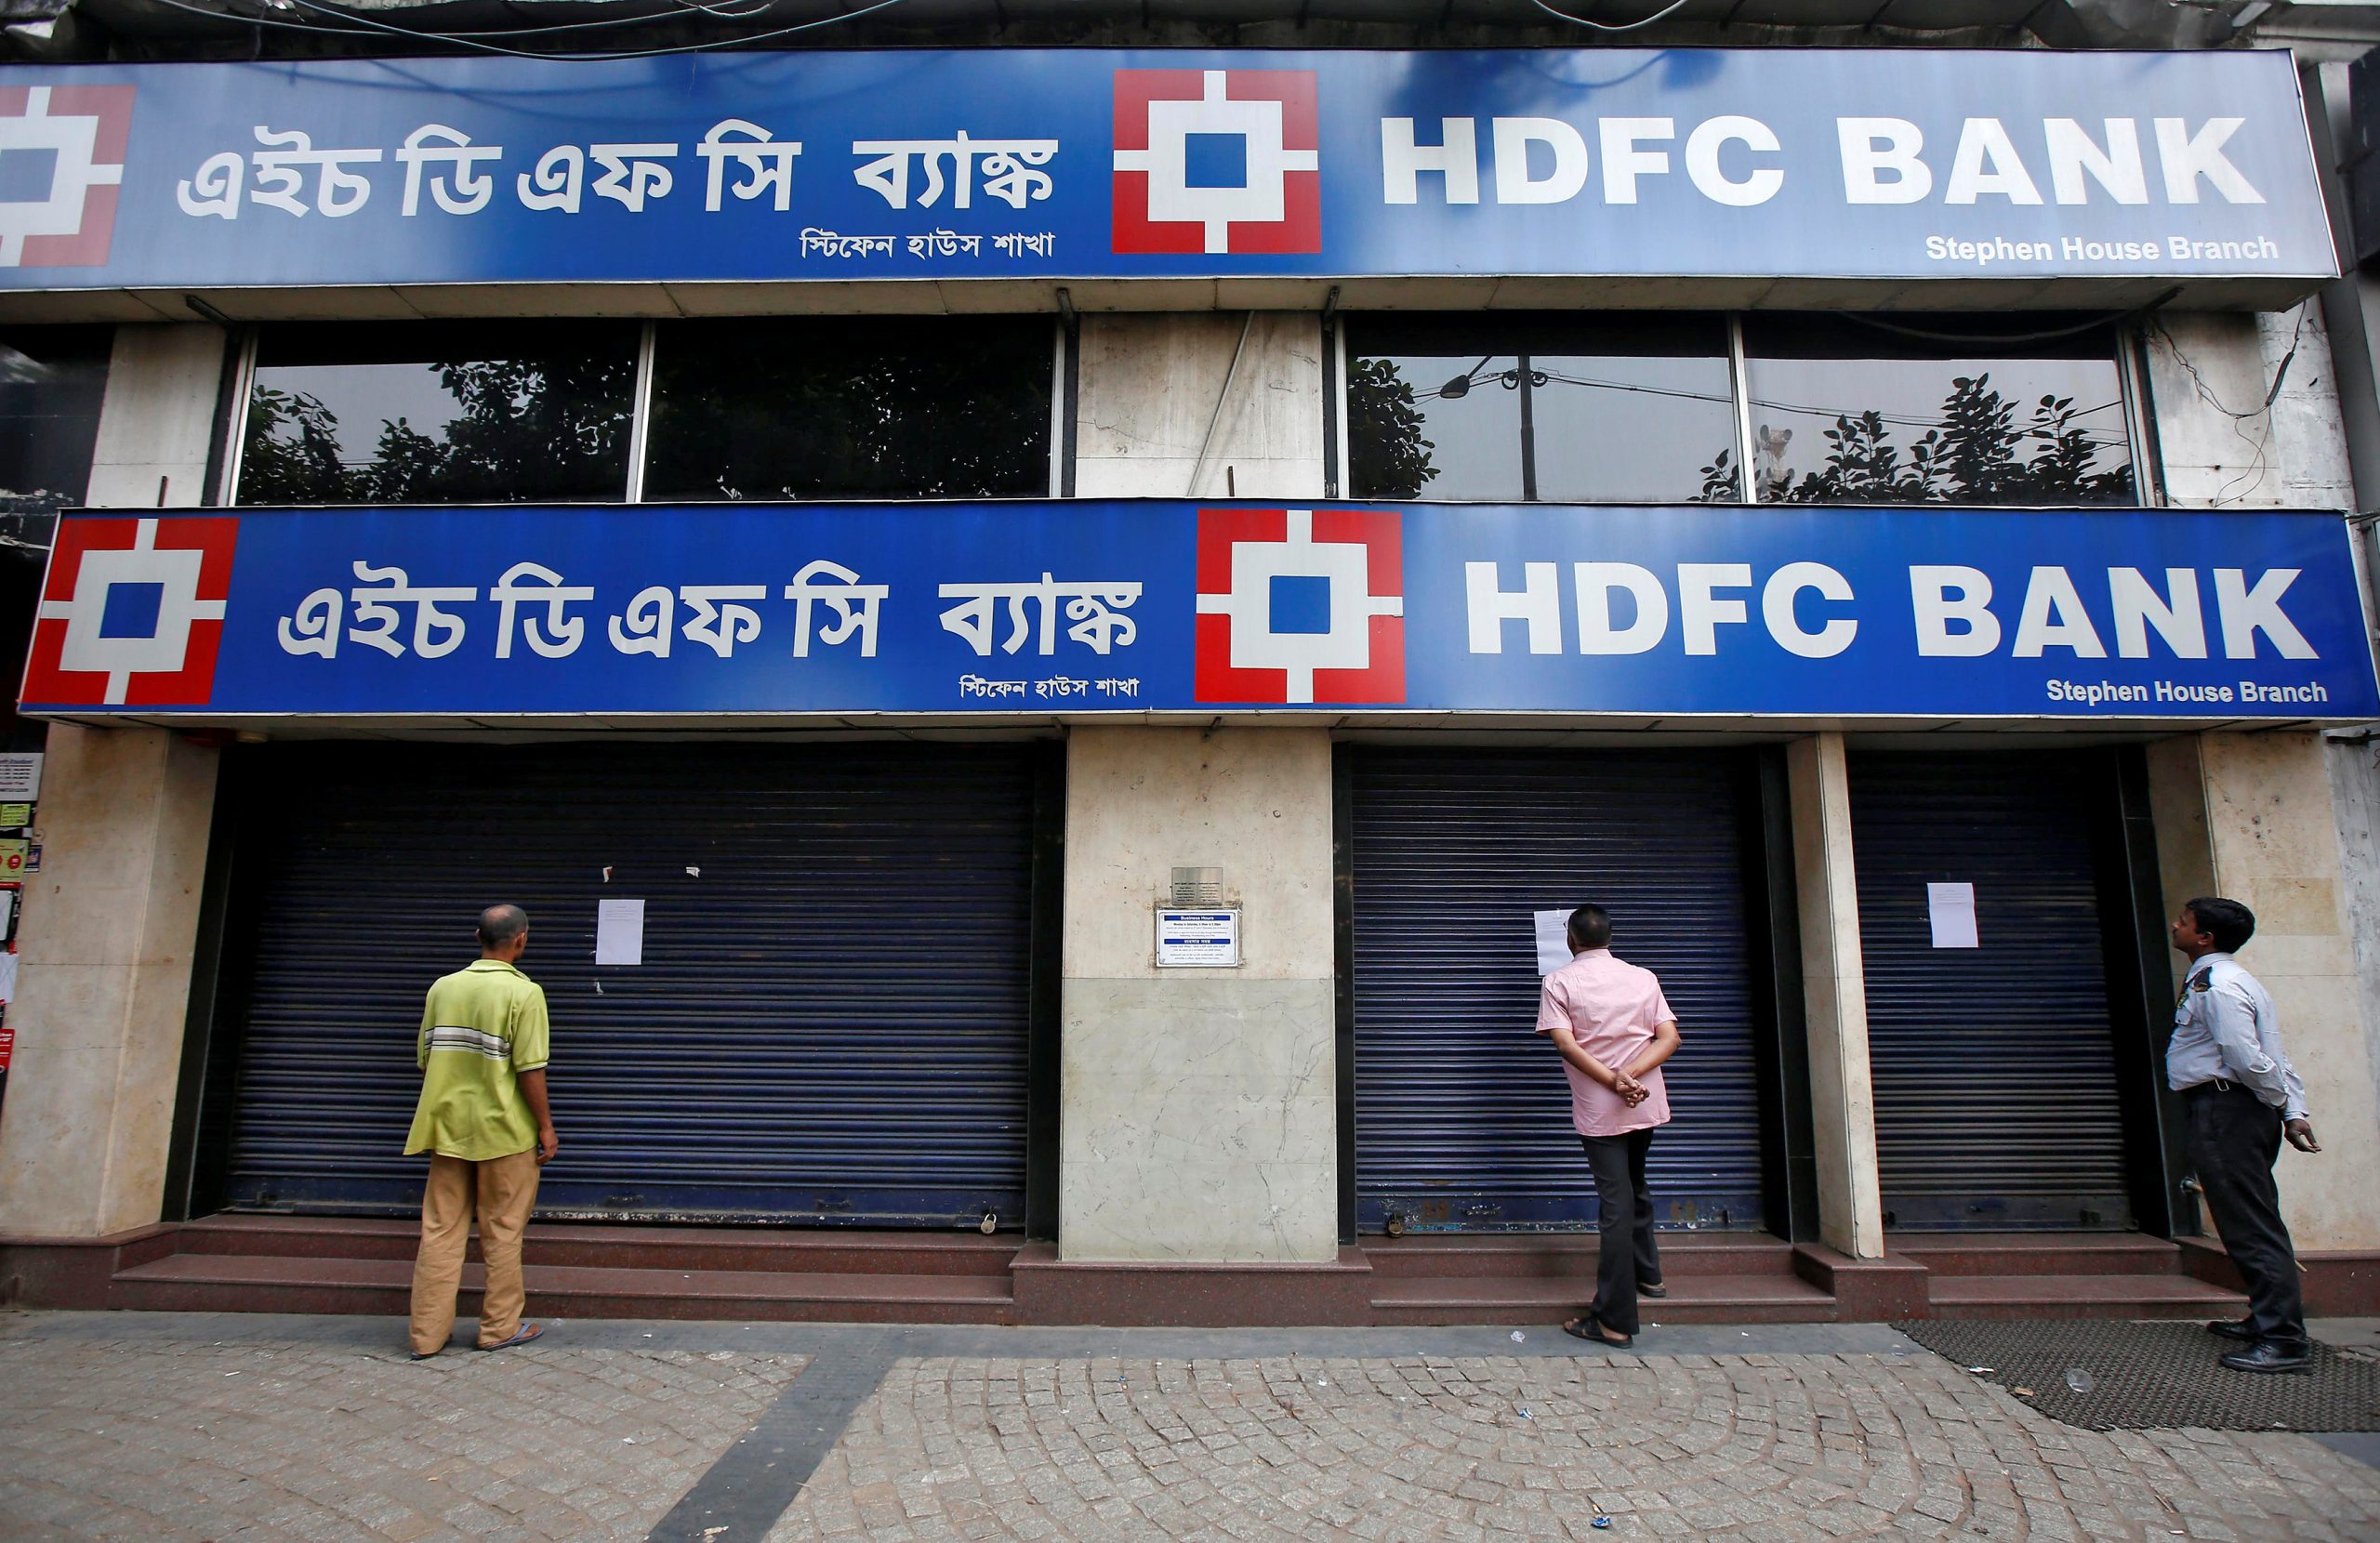 HDFC Bank of India successfully acquires the country's largest mortgage lender in a $40 billion takeover